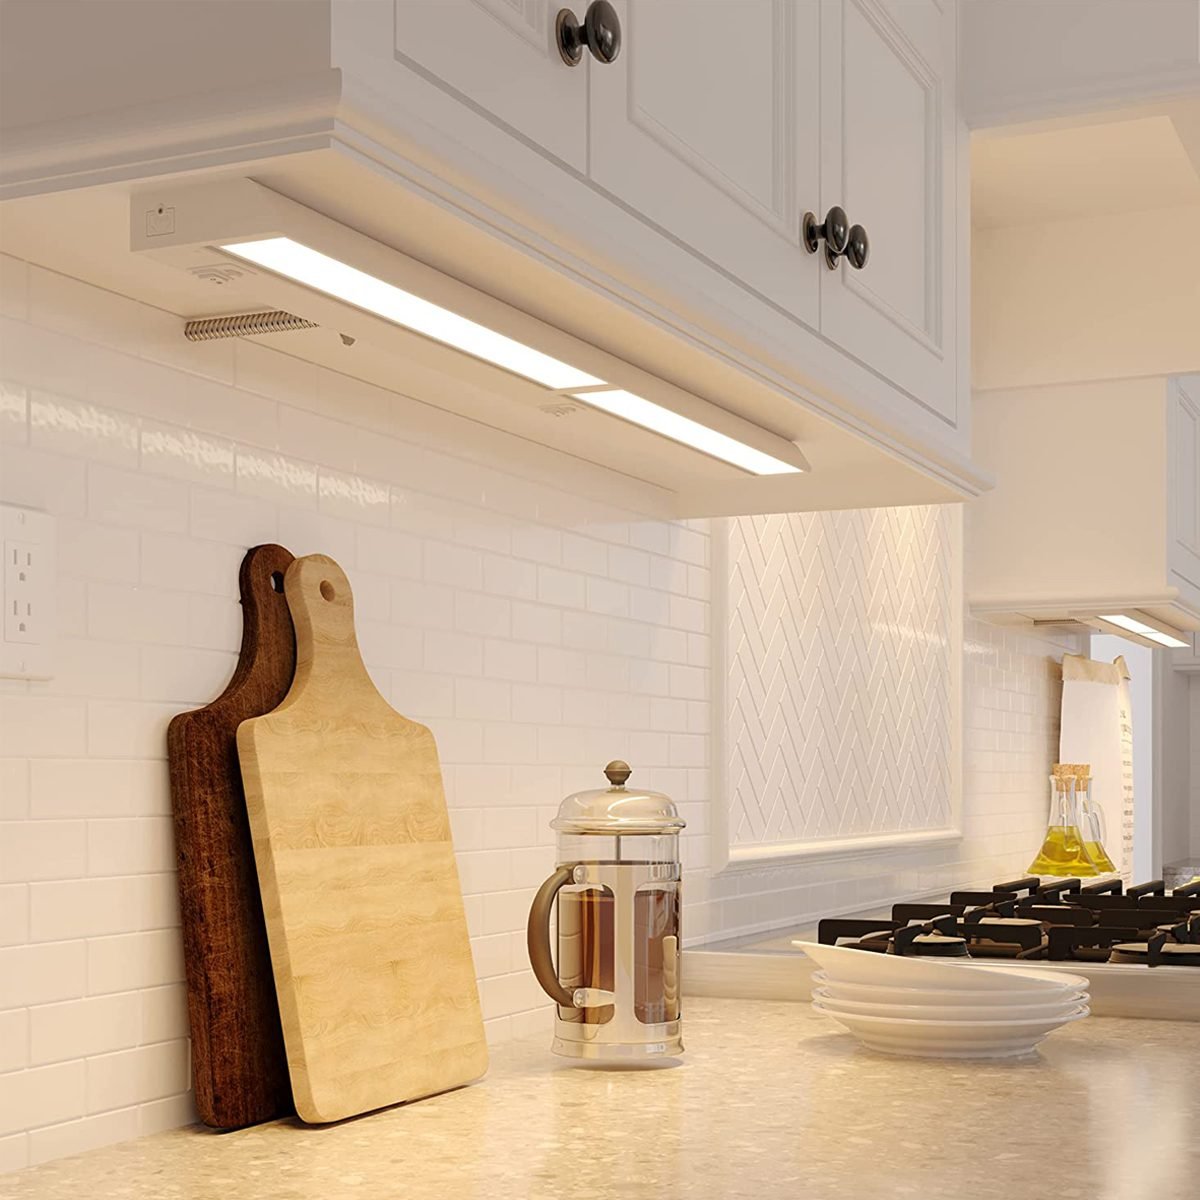 Best Under-Cabinet Lighting Options for Your Kitchen in 2023